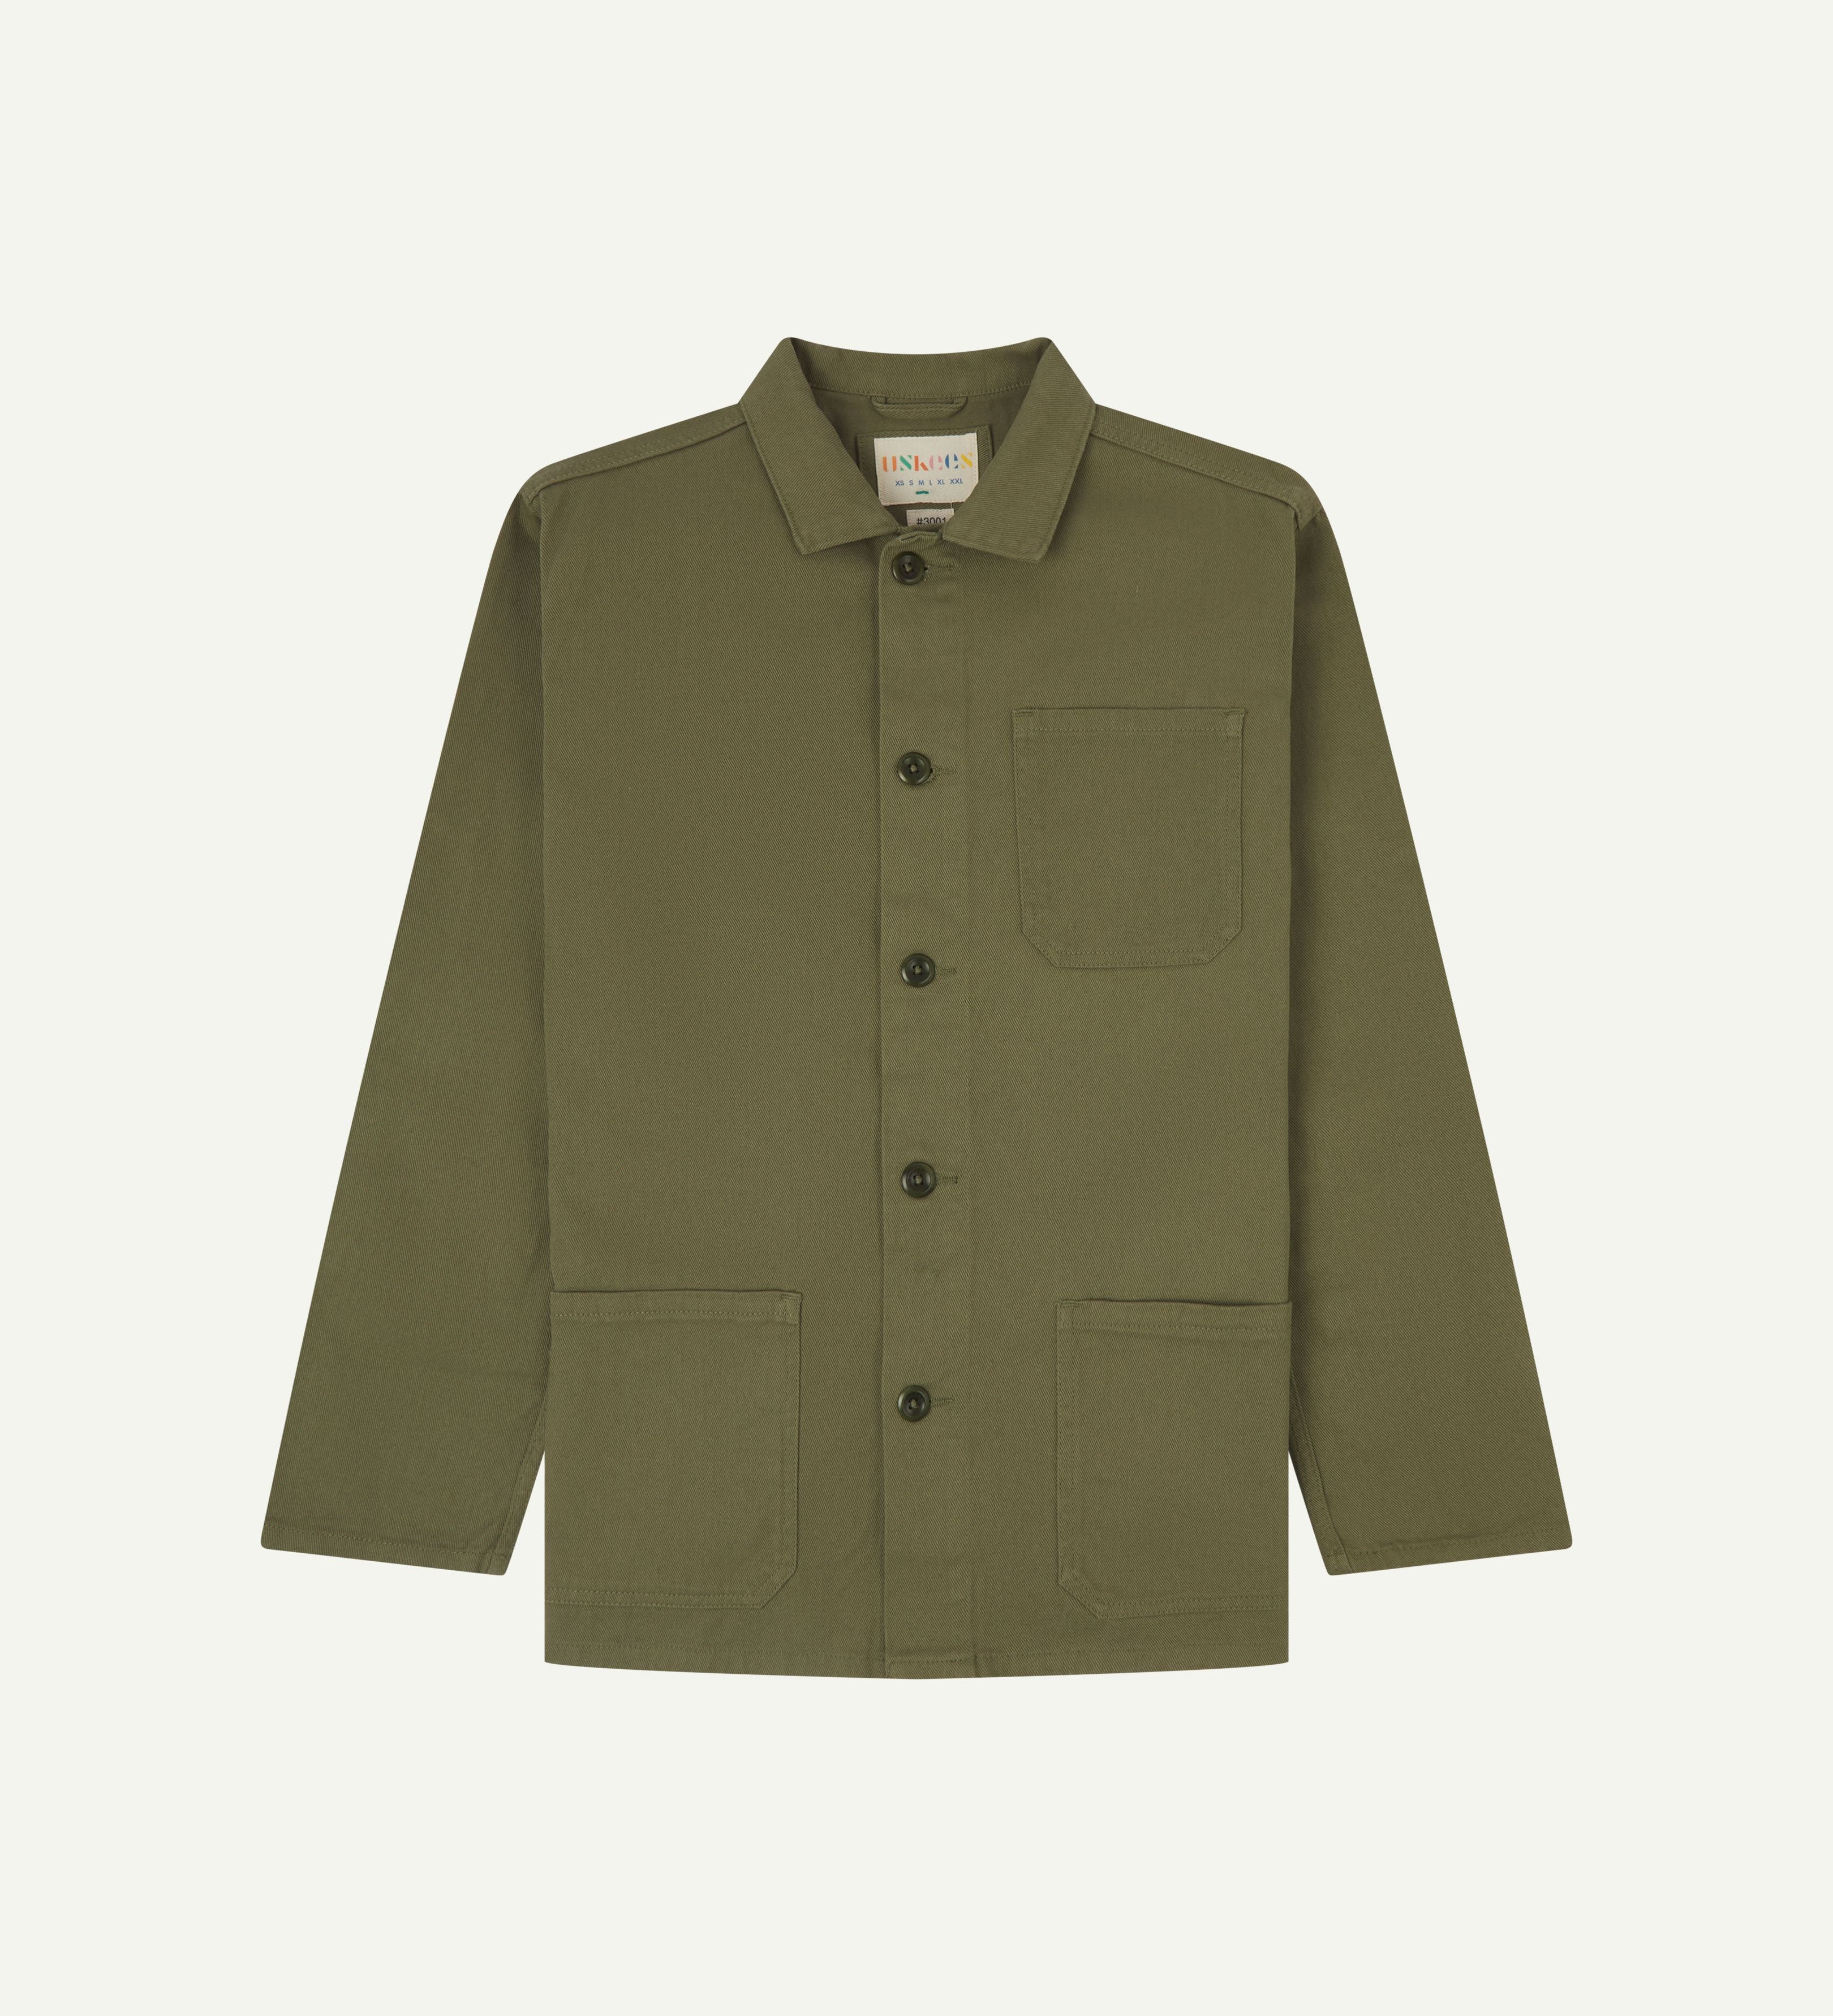 Front flat shot of moss-green buttoned organic cotton-drill overshirt from Uskees. Clear view of deep pockets on the chest and front and Uskees branding label.